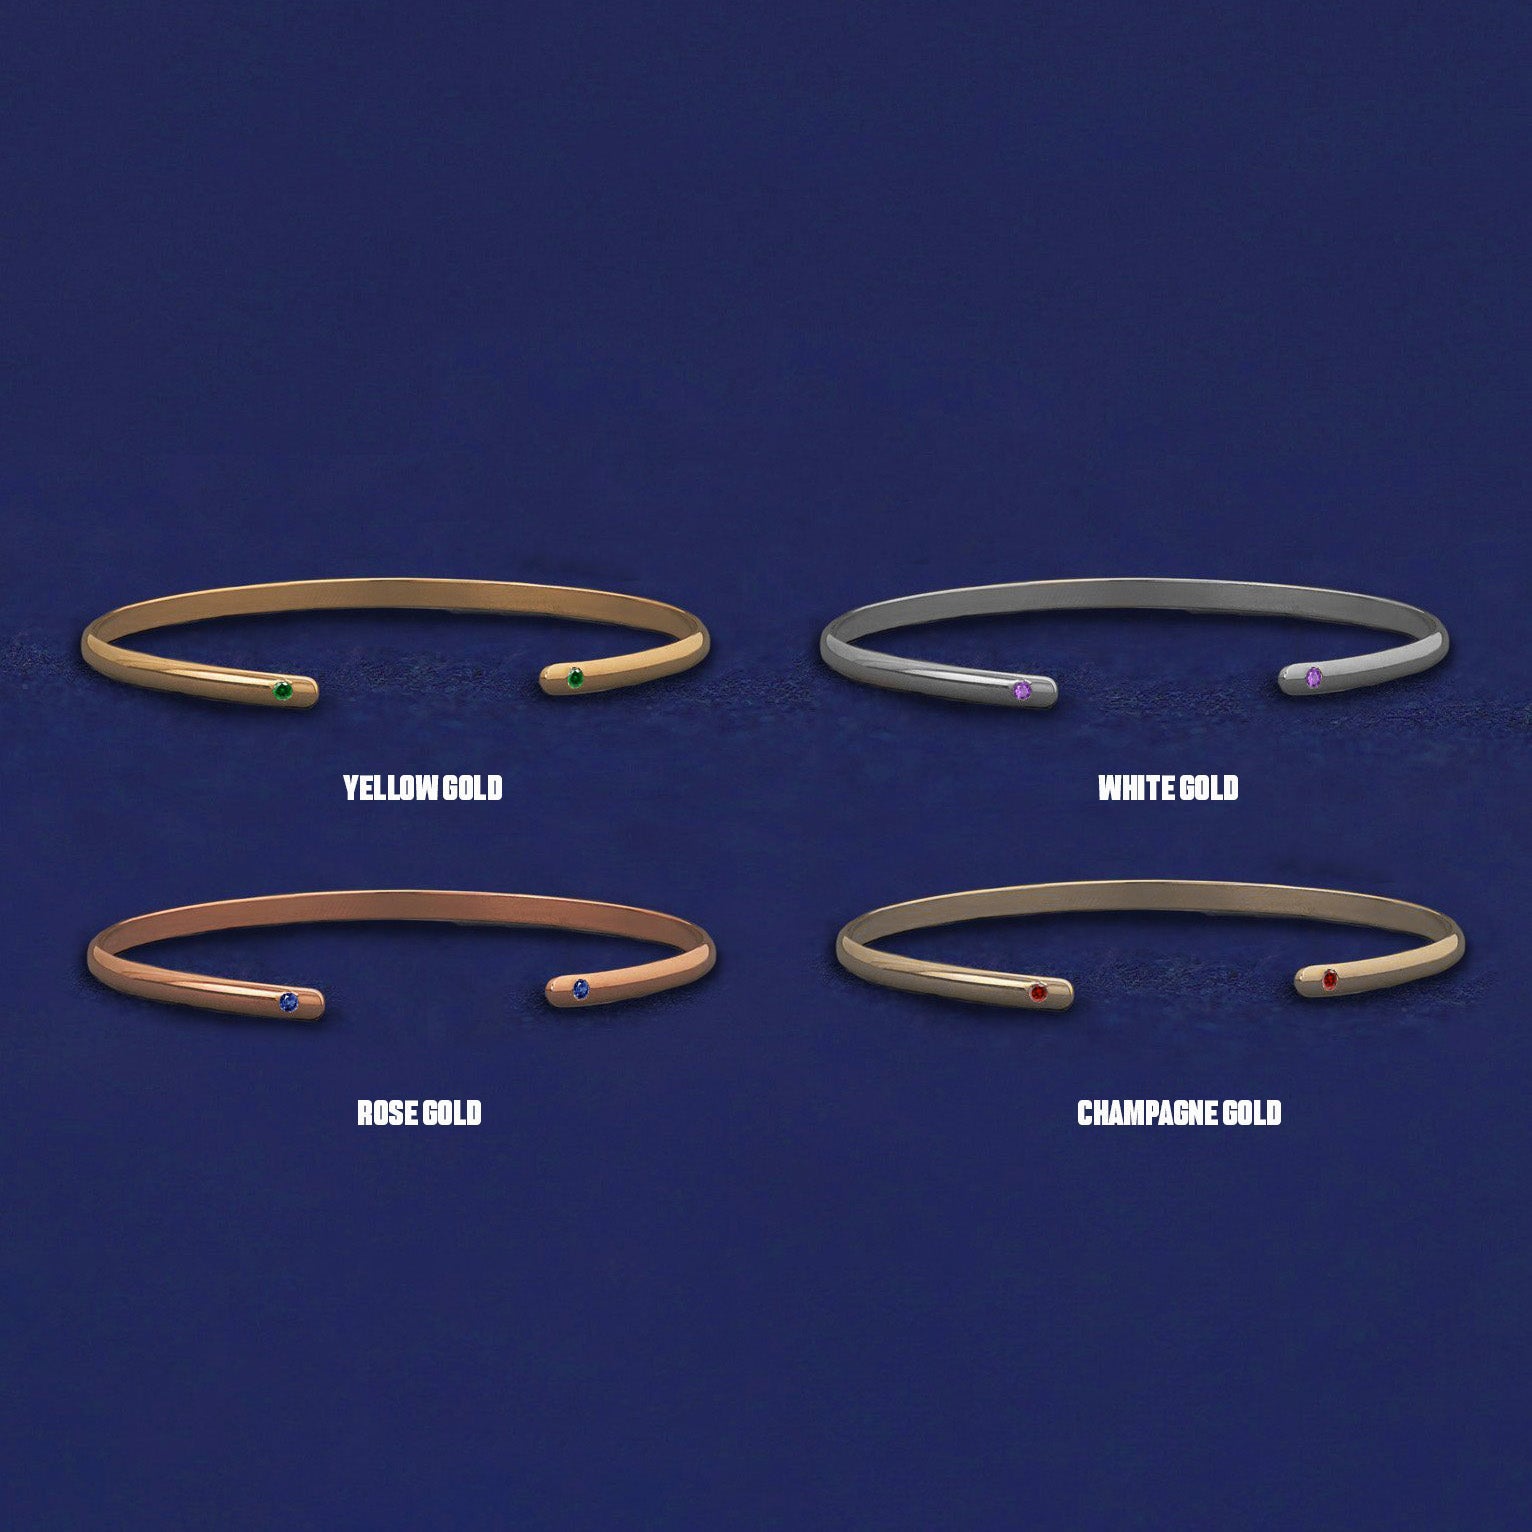 Four versions of the Gemstone Open Bangle shown in options of yellow, white, rose and champagne gold